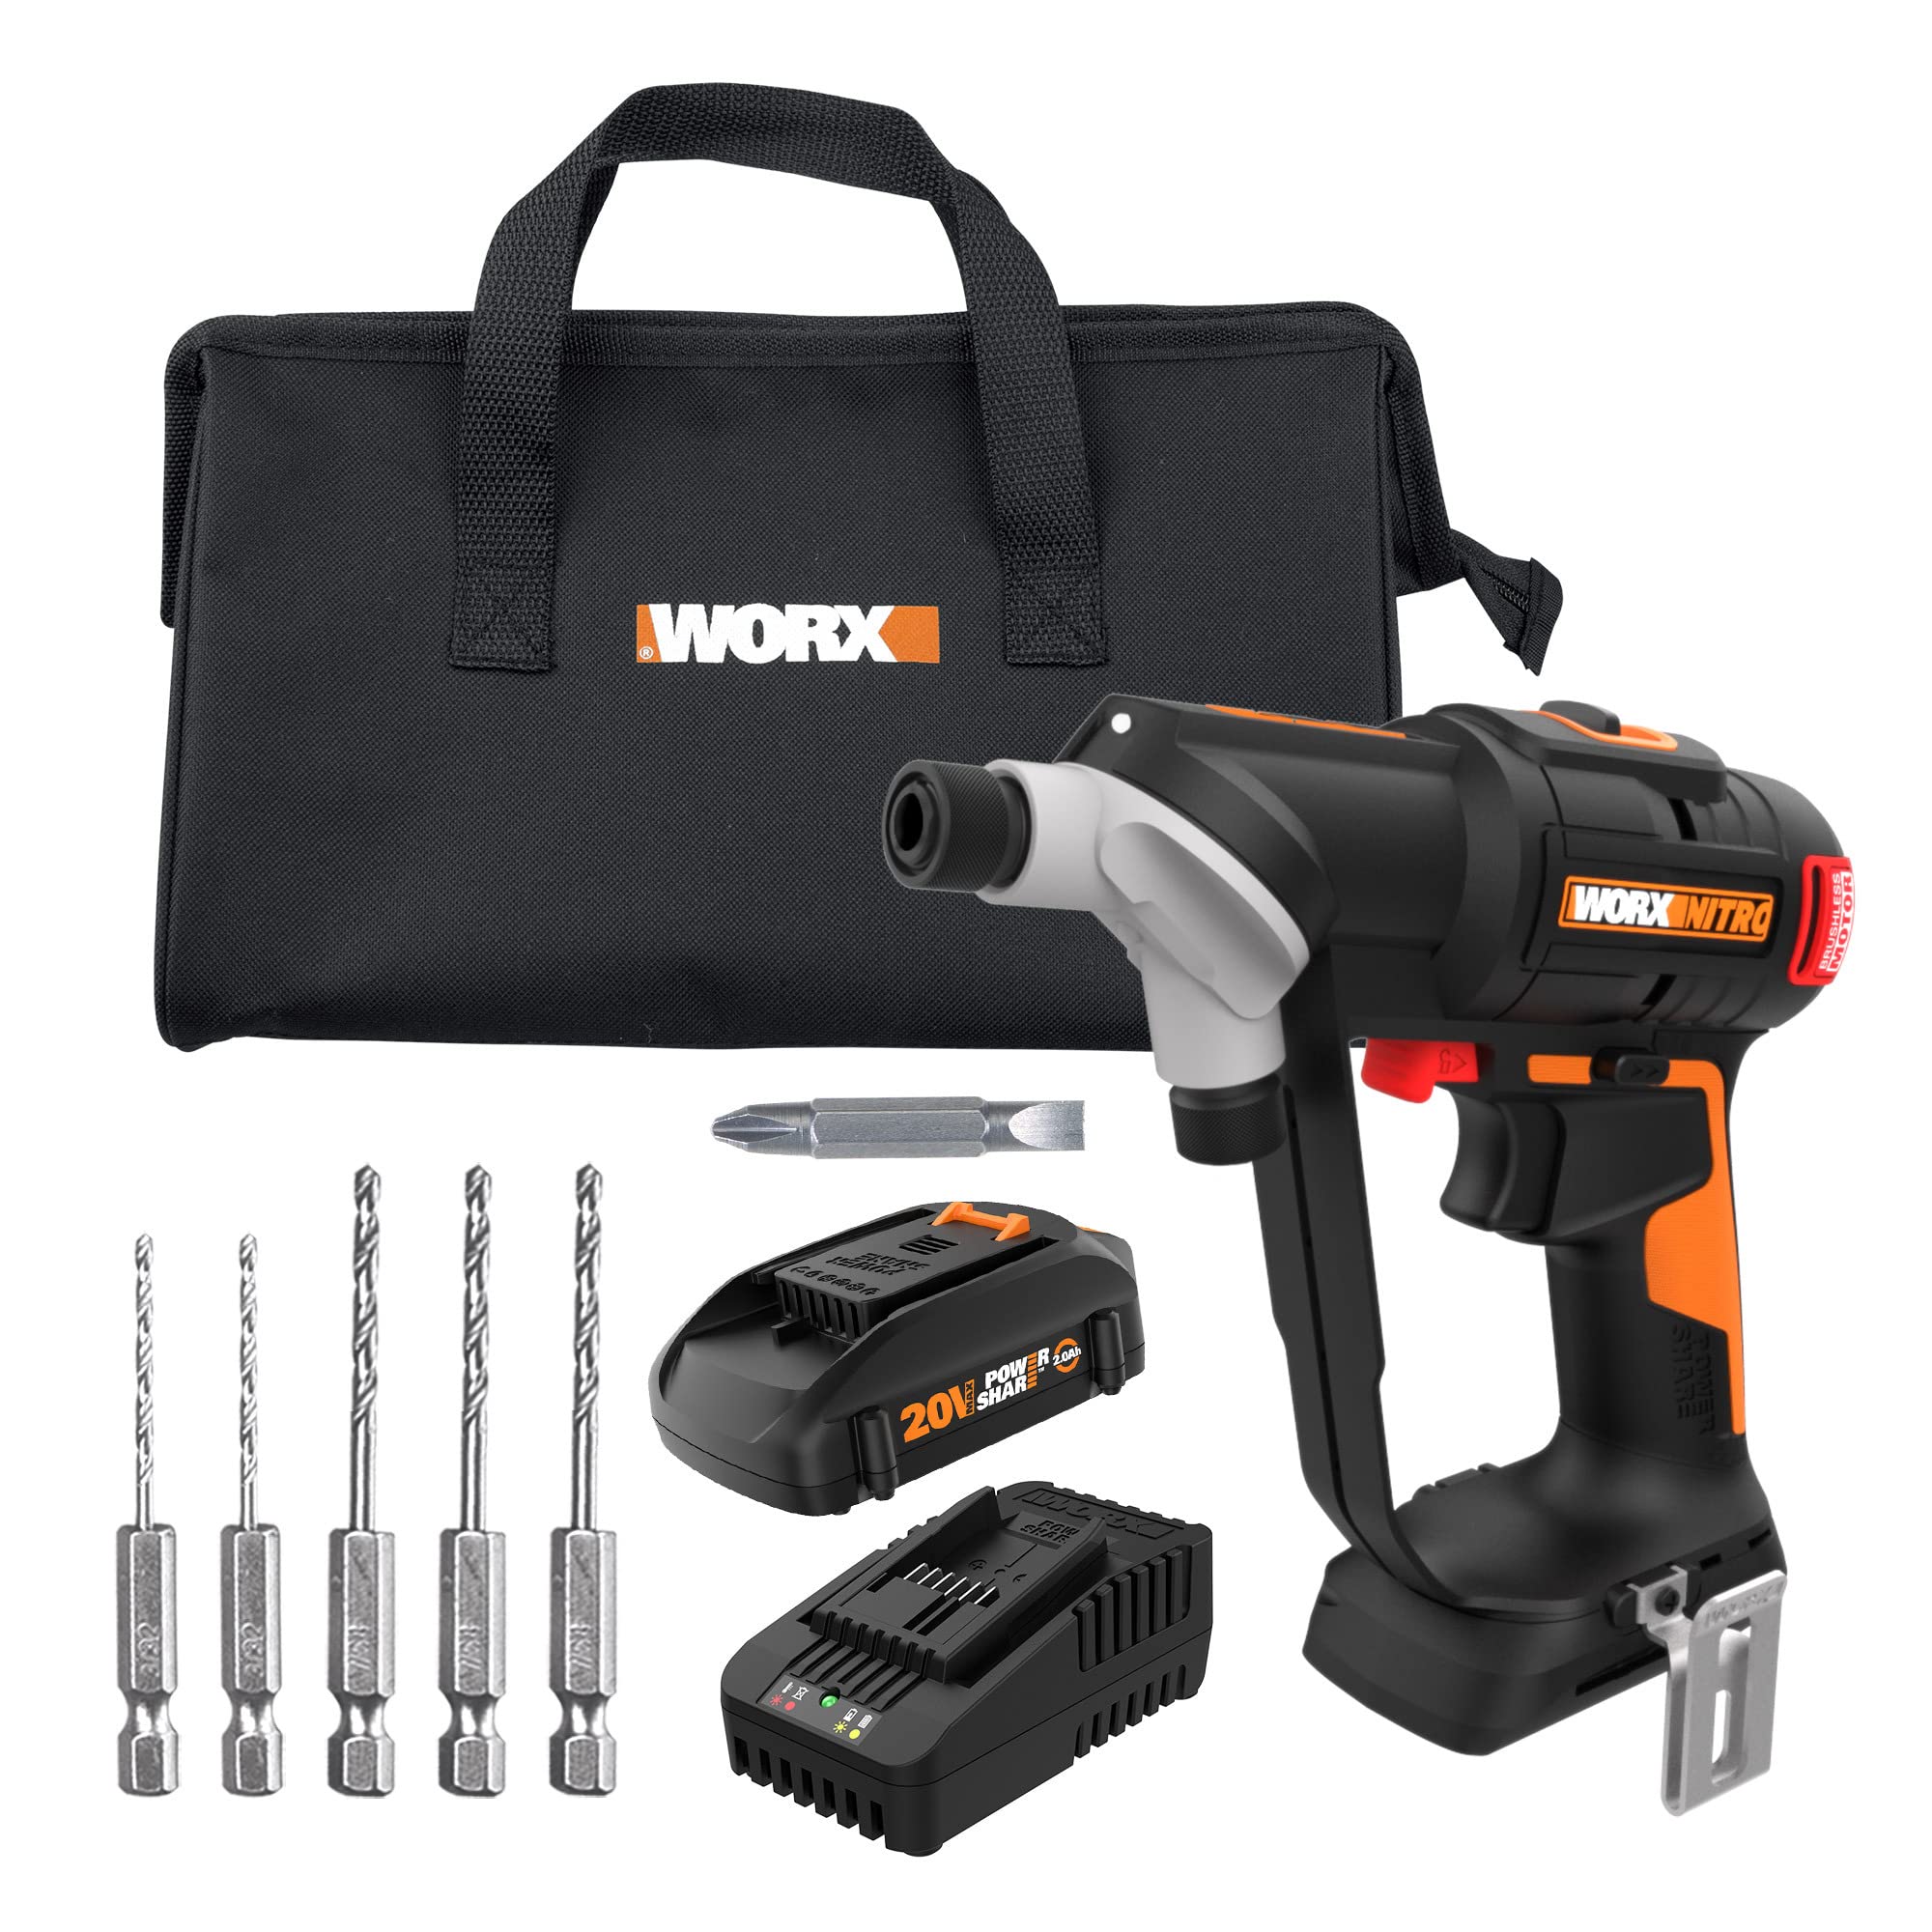 Worx NITRO WX177L 20V Brushless Switchdriver 2.0 2-in-1 Cordless Drill & Driver